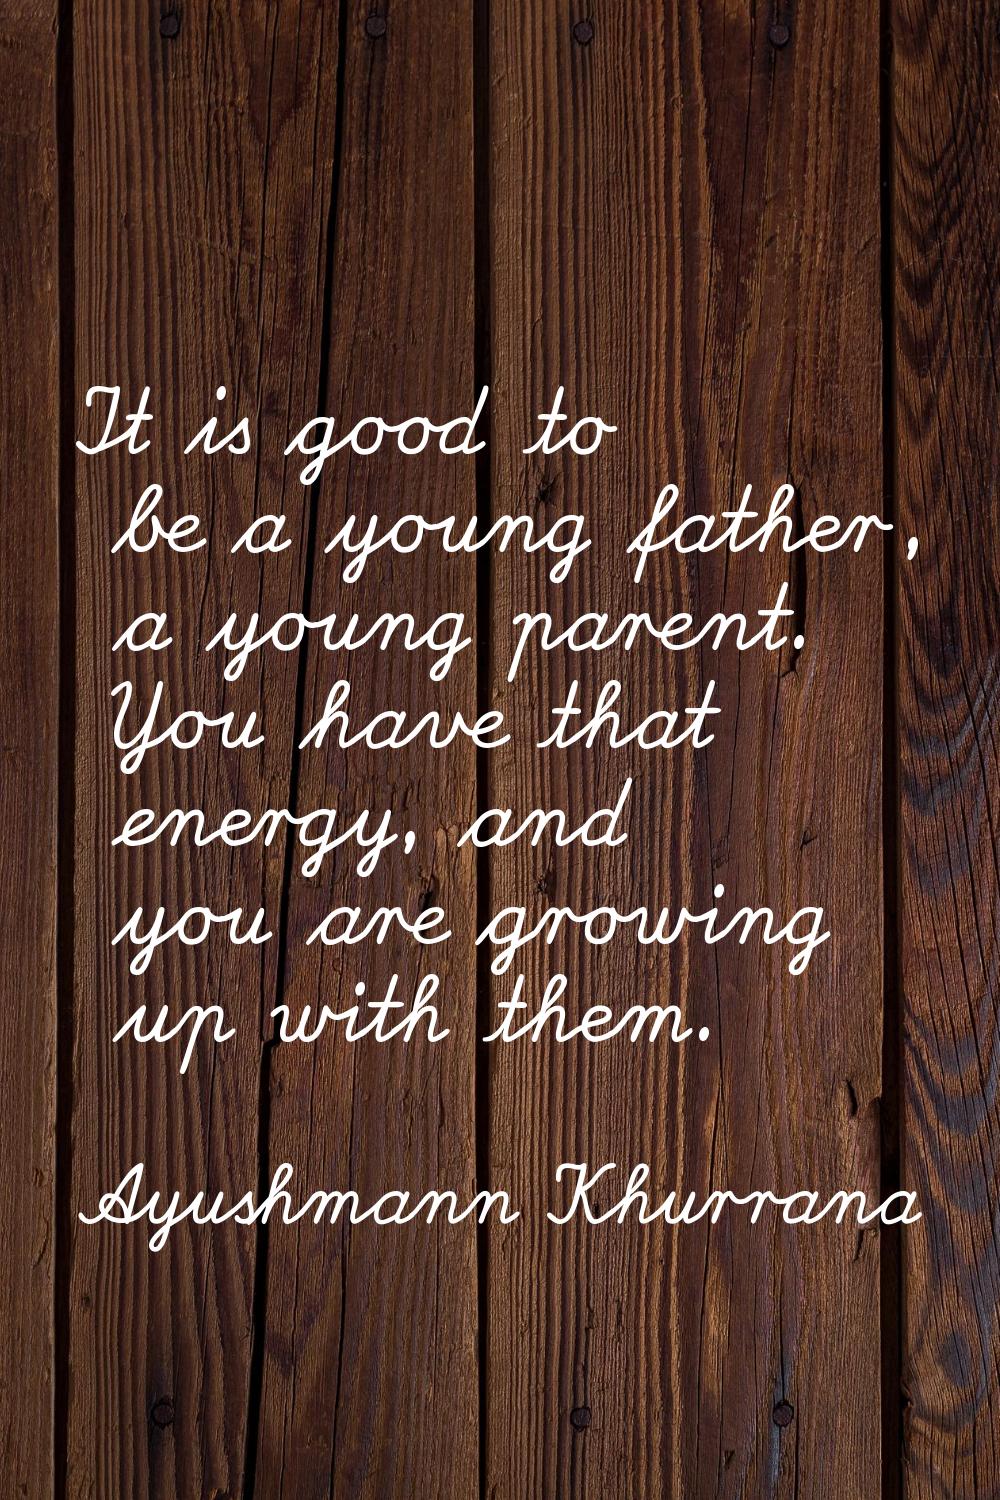 It is good to be a young father, a young parent. You have that energy, and you are growing up with 